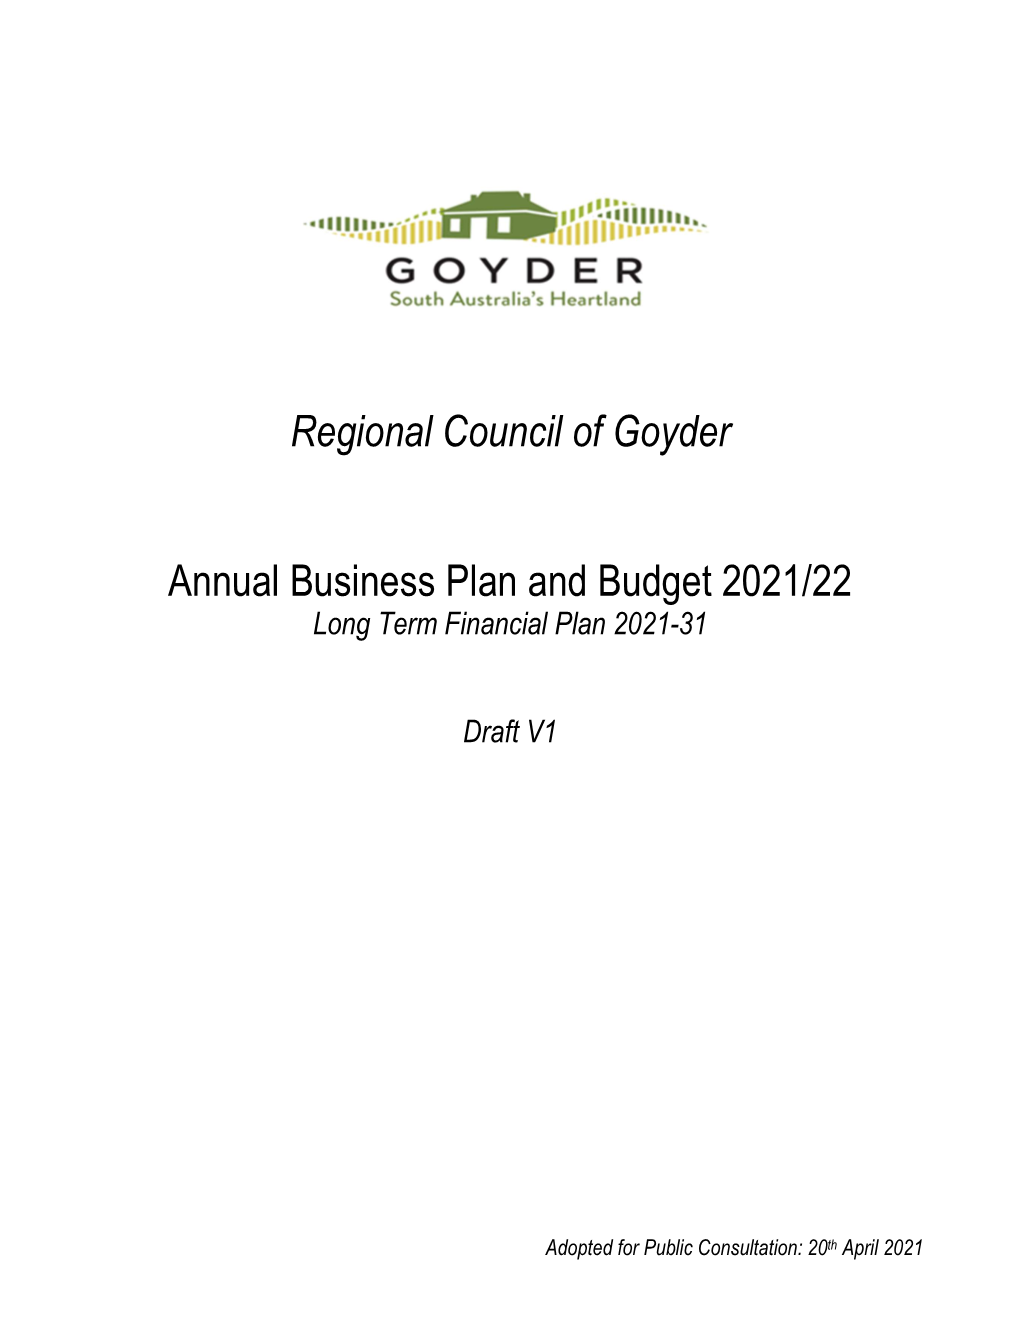 Regional Council of Goyder Annual Business Plan and Budget 2021/22